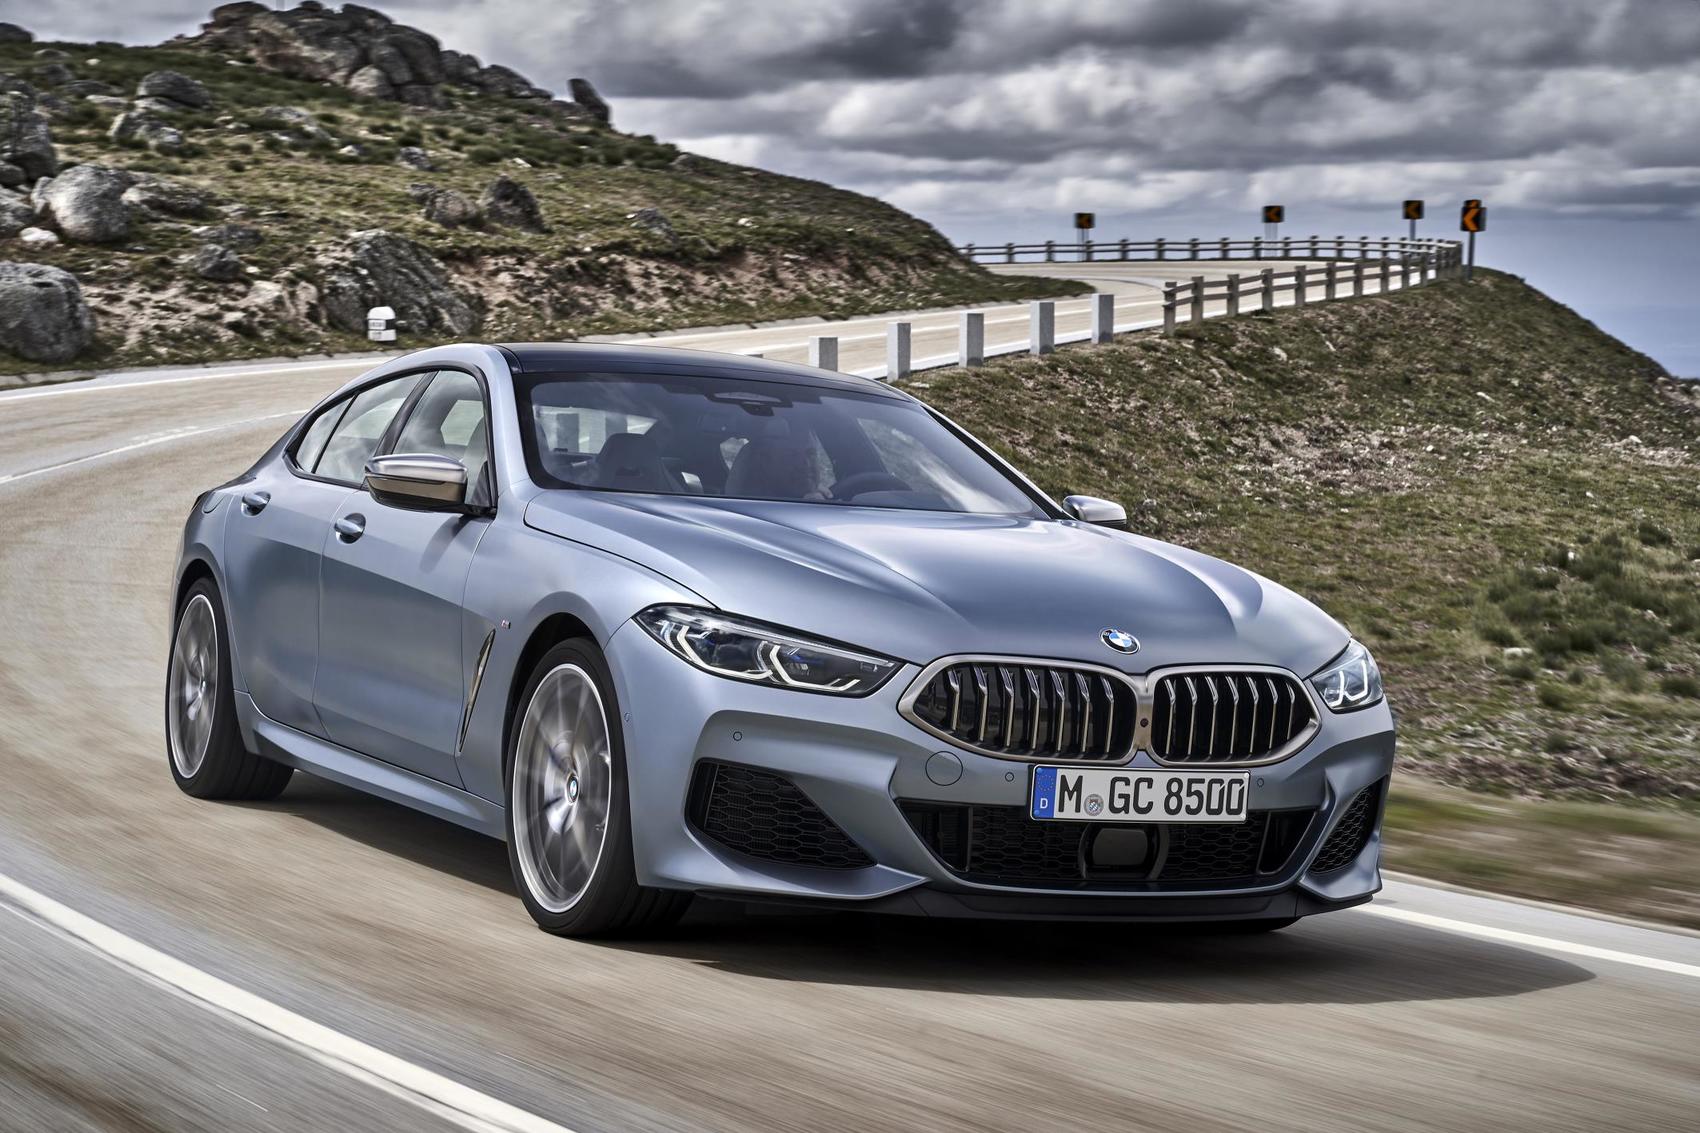 2020 BMW 8 Series Gran Coupe: When Having Four Doors Is More Fun